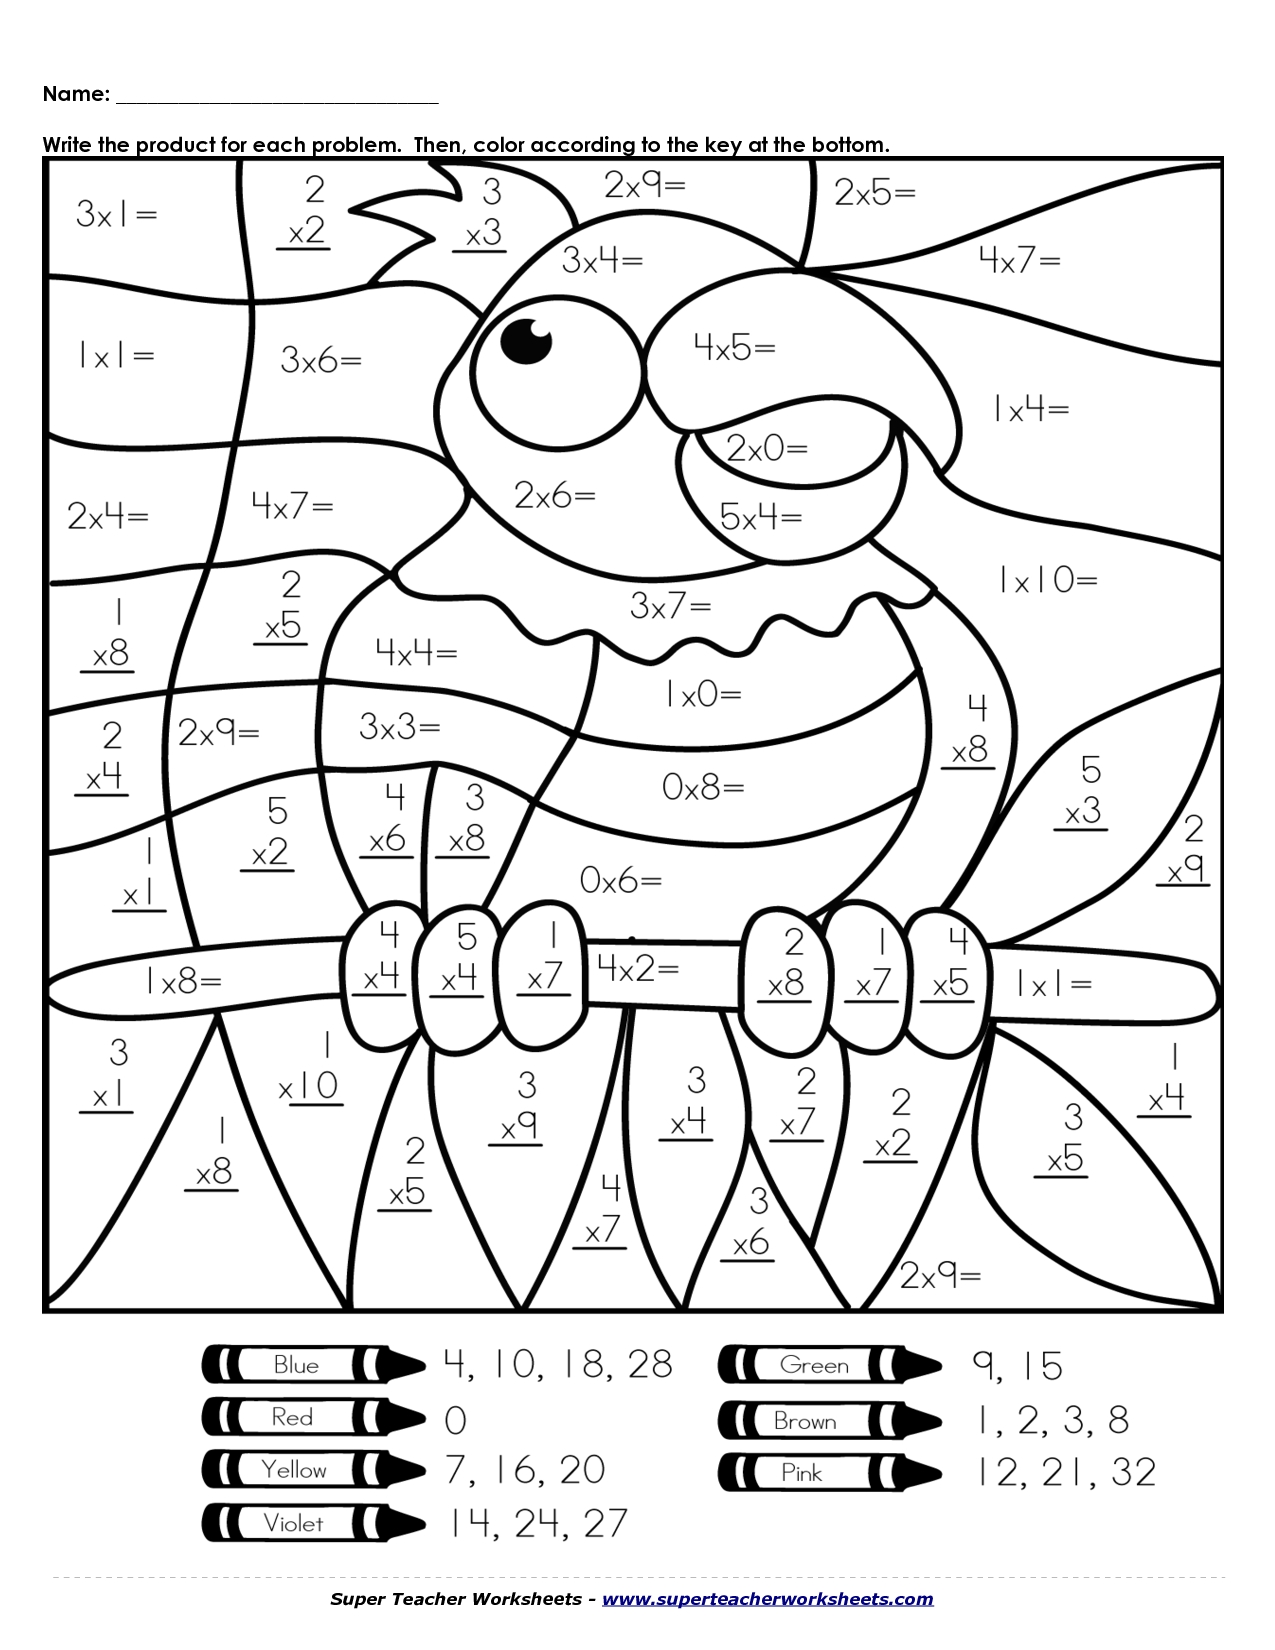 color-by-number-multiplication-printable